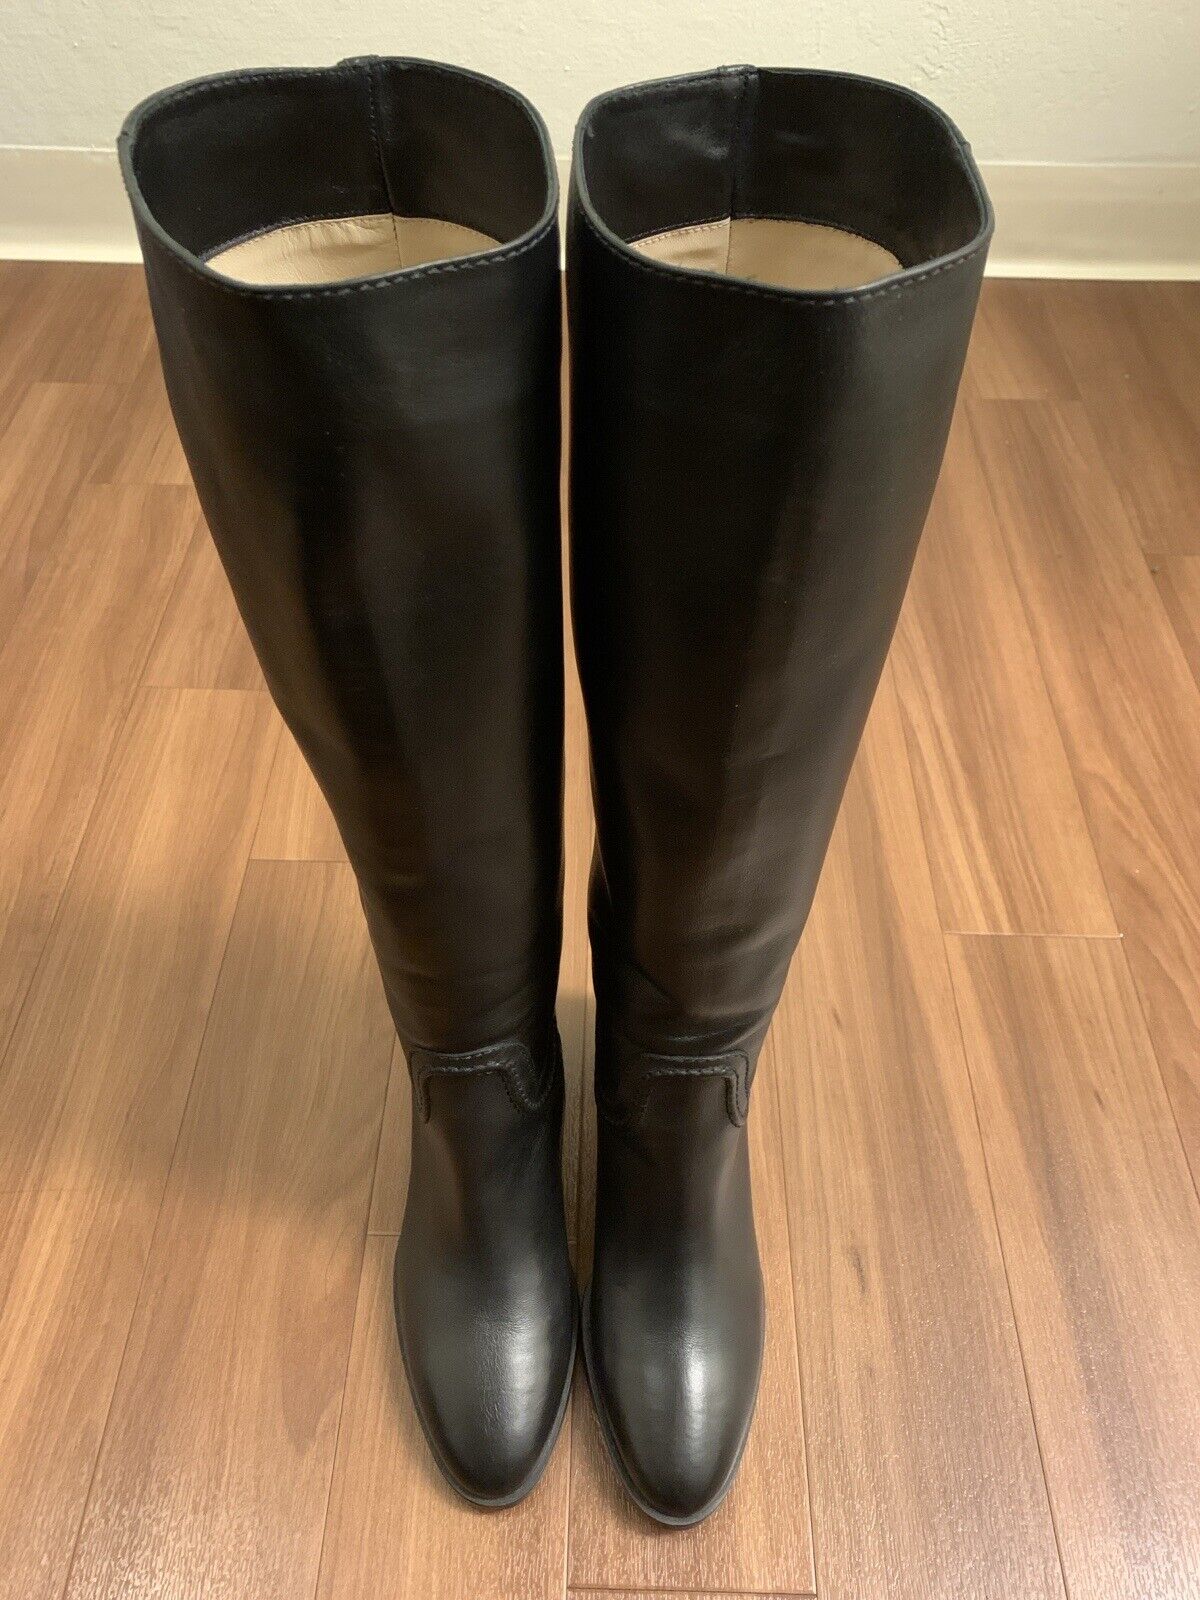 Tod’s Womens Leather Knee High Boots Size 7 Color Brown Made in Italy + Dust Bag